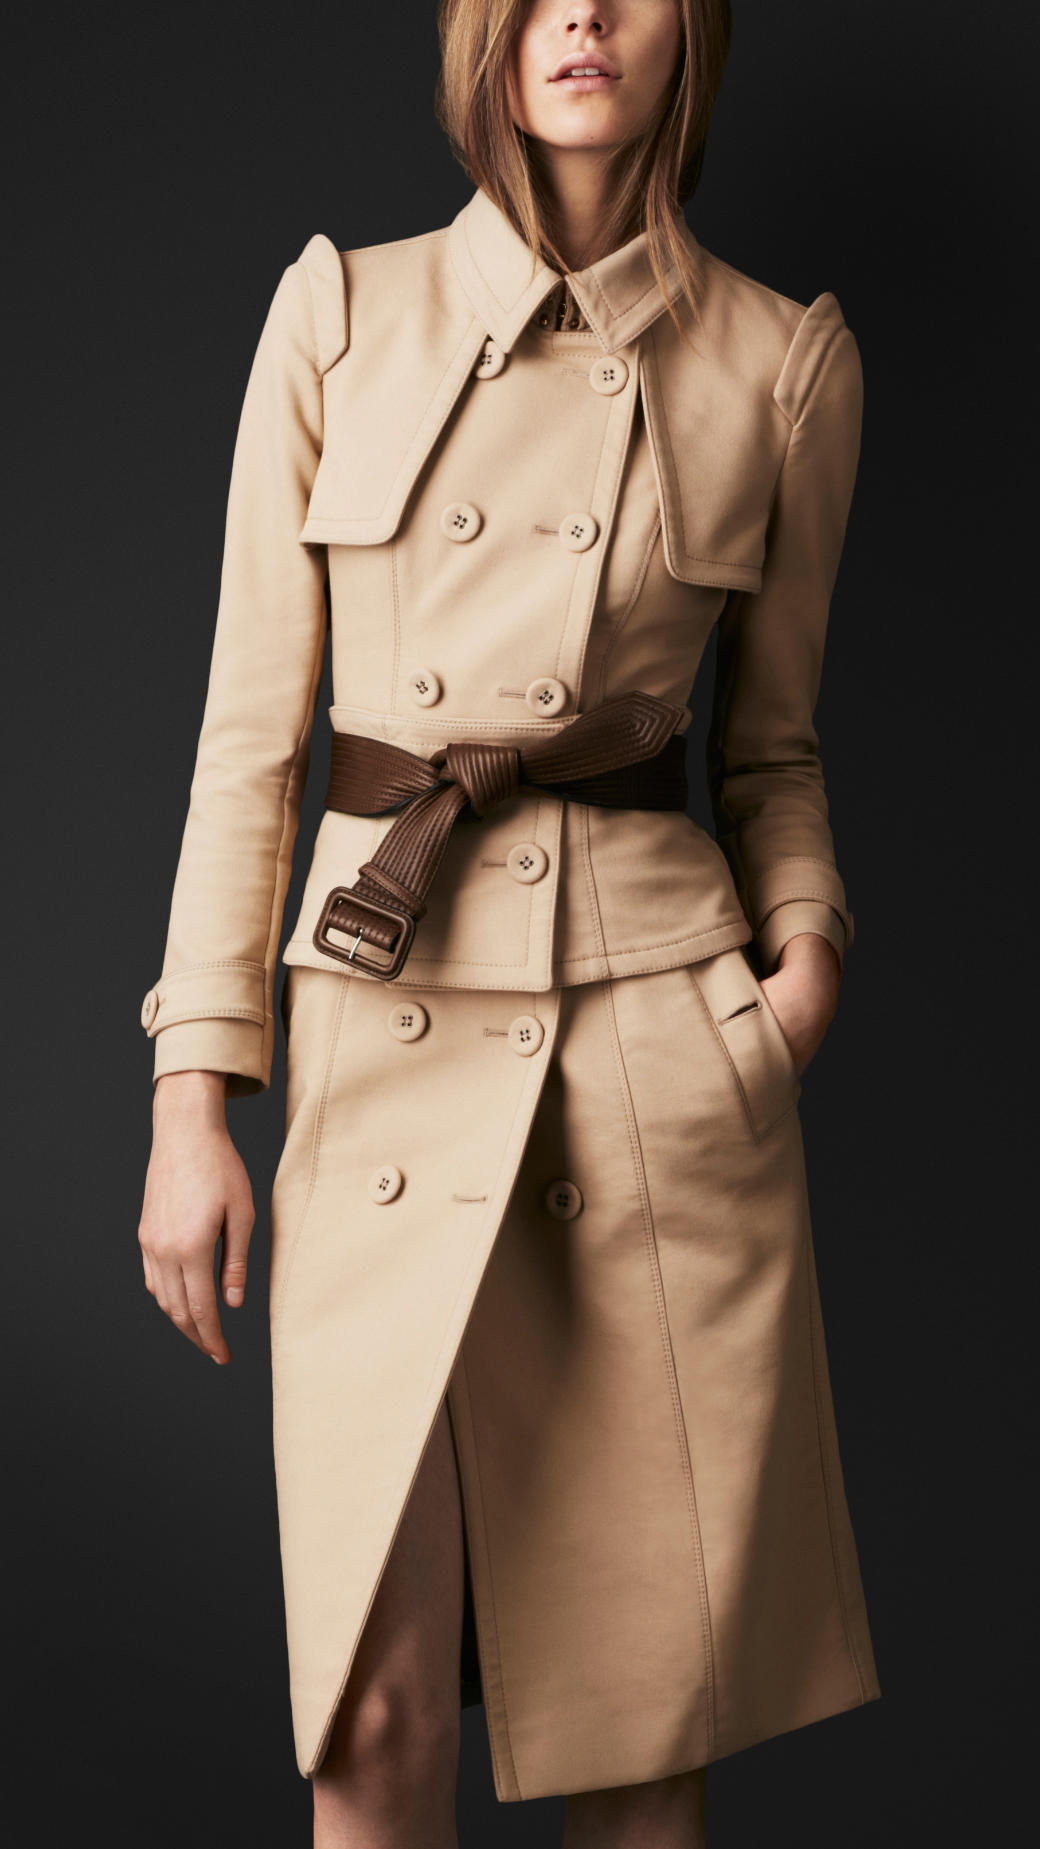 Lyst - Burberry Prorsum Corset Trench Coat in Natural